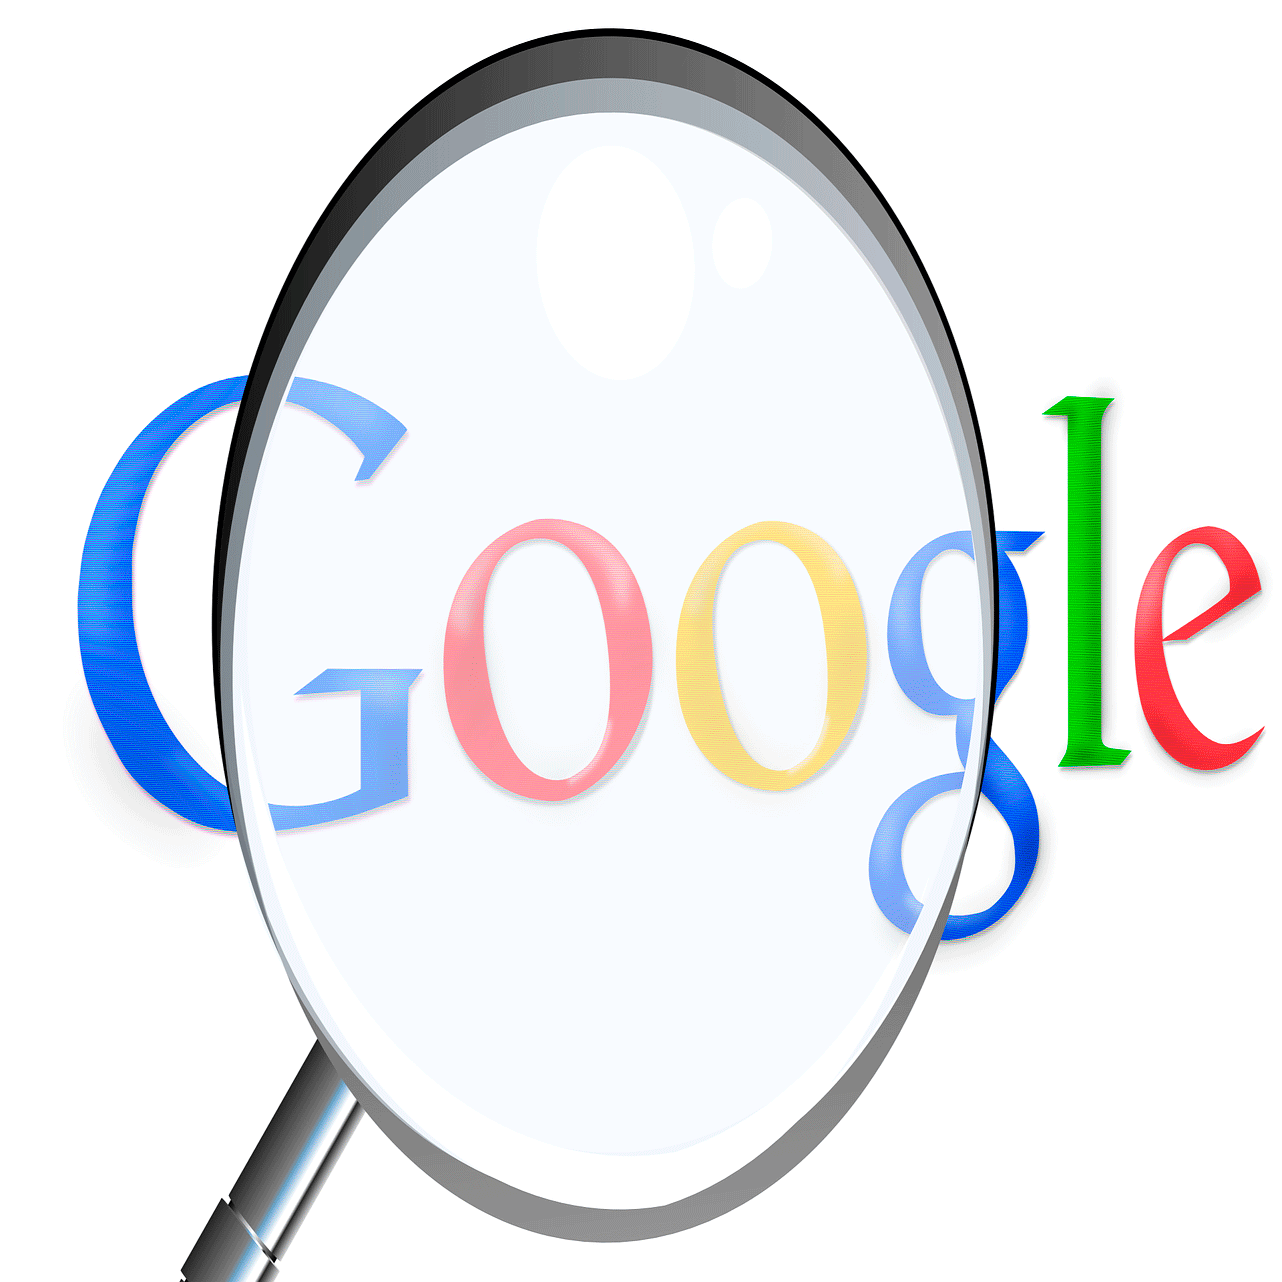 Academic Study: Google’s Top Stories chosen from mostly left-leaning sources